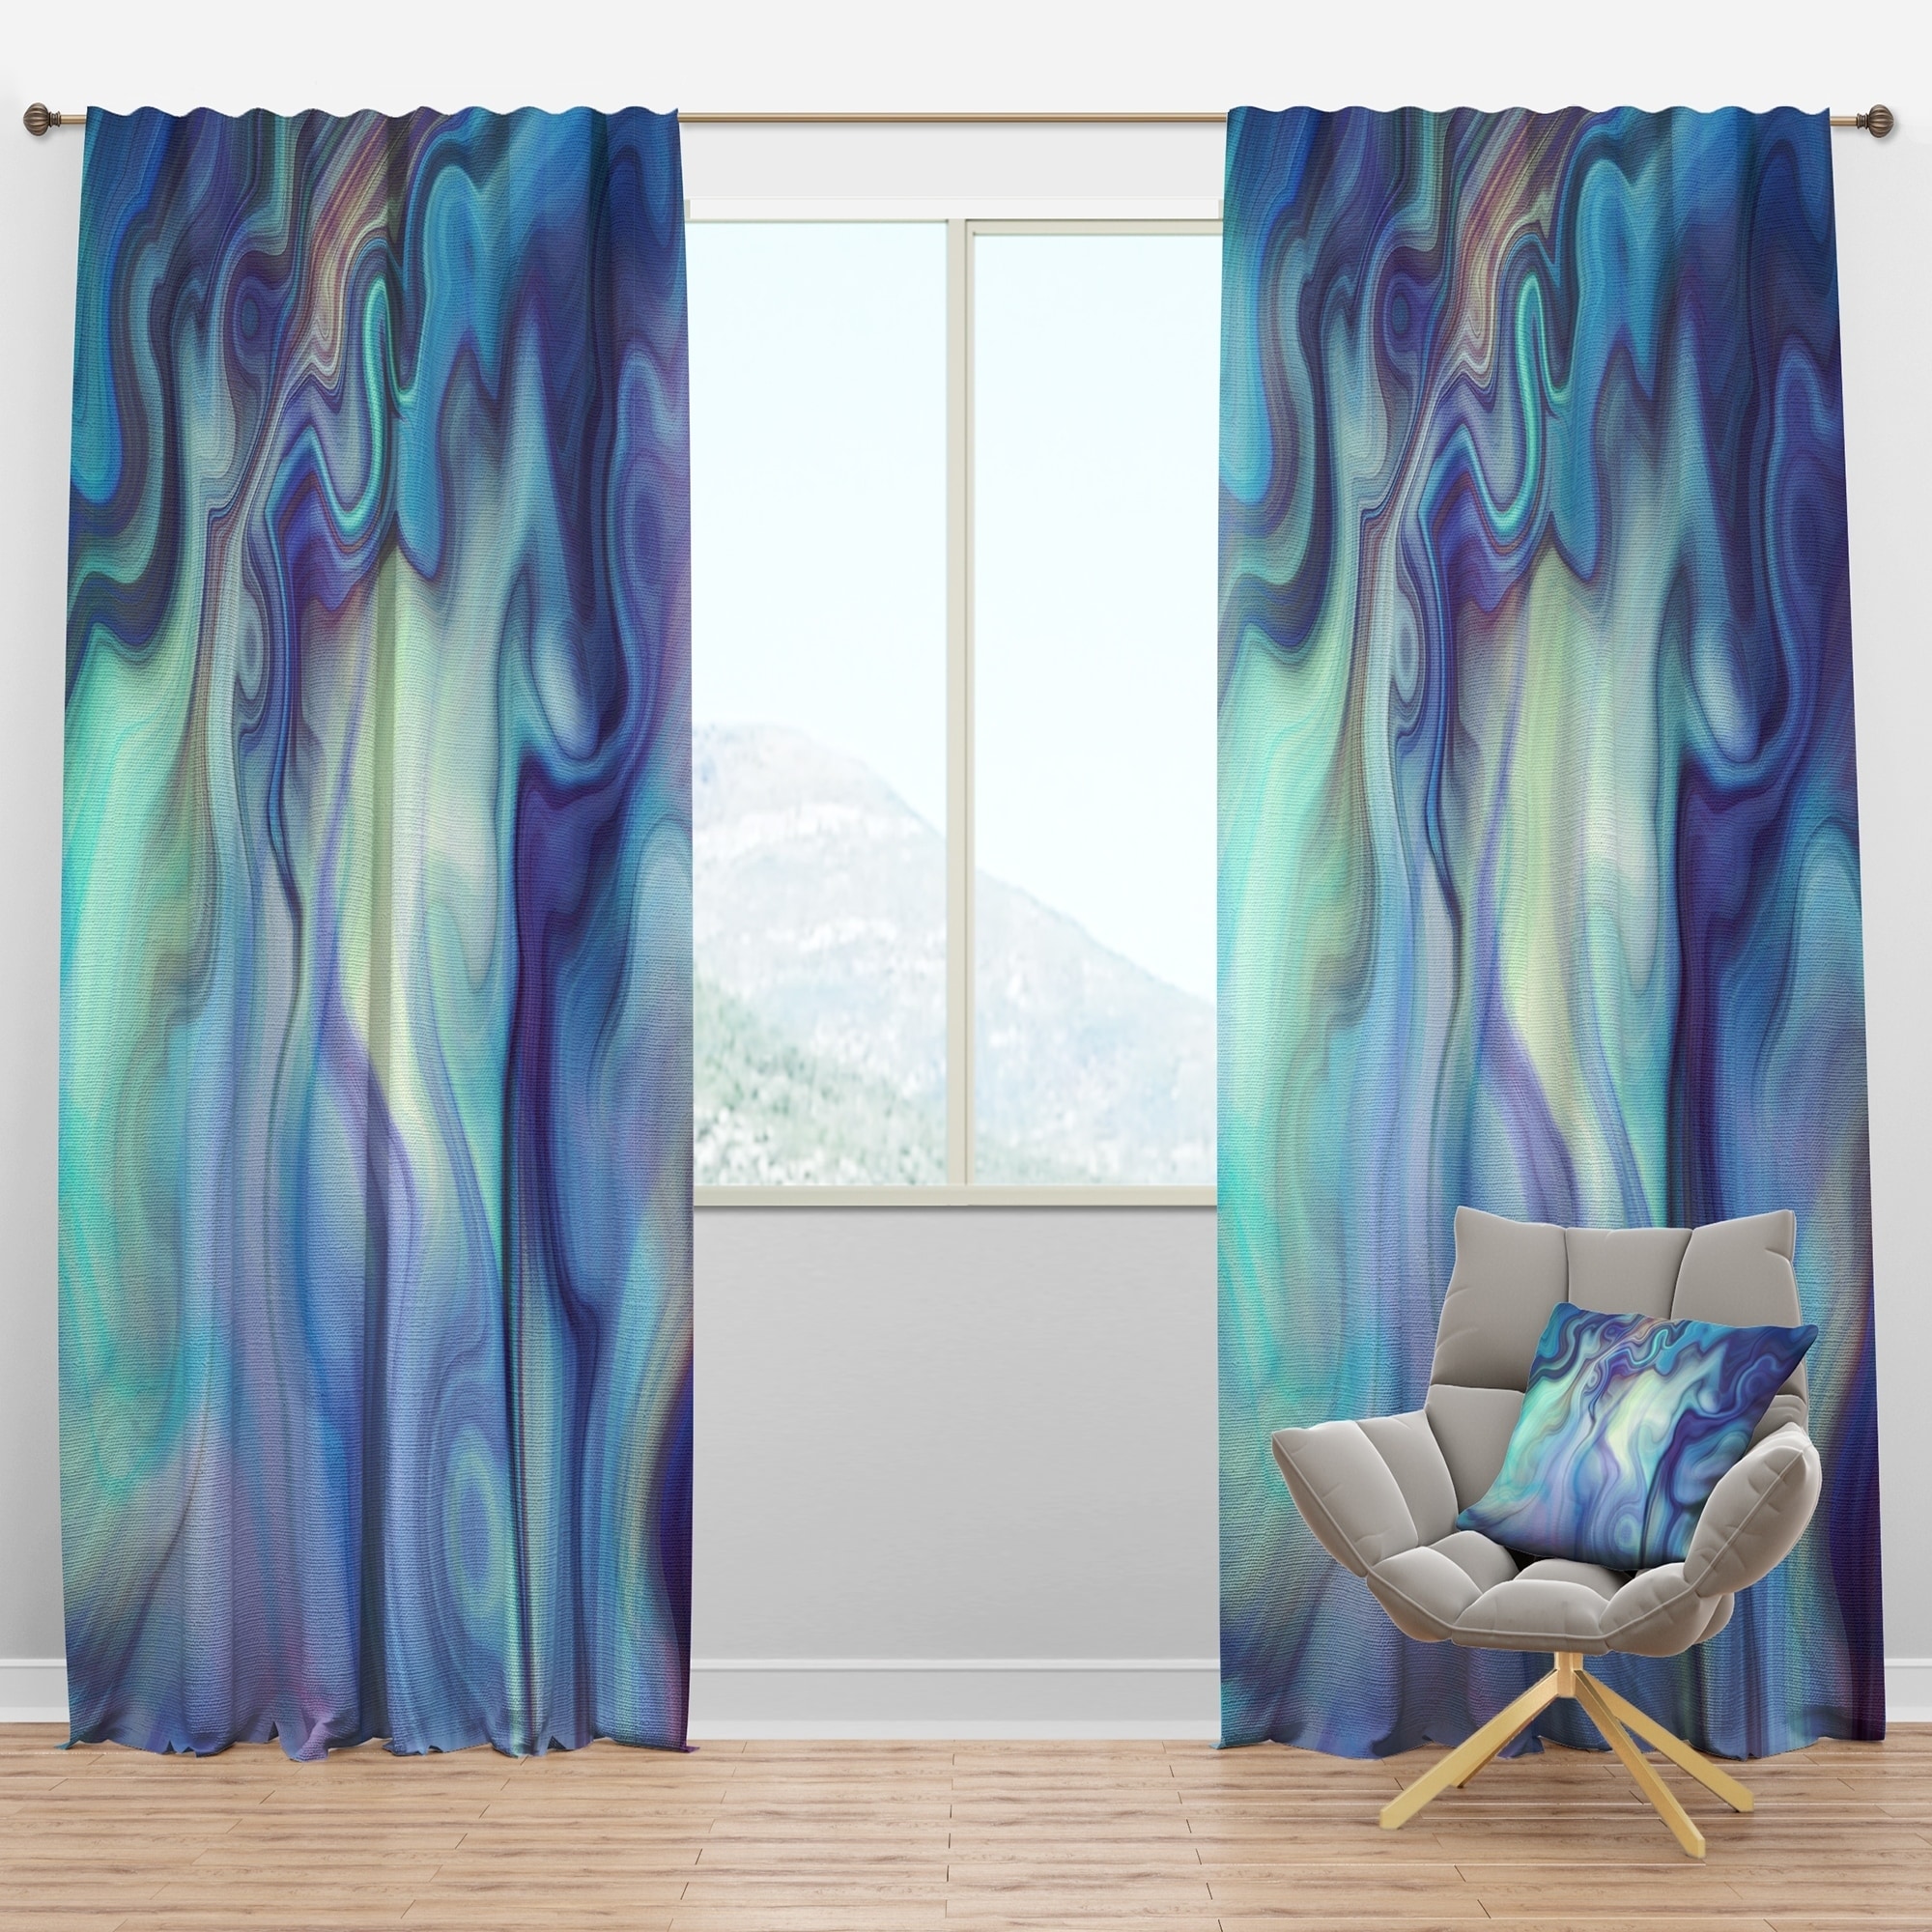 turquoise curtains